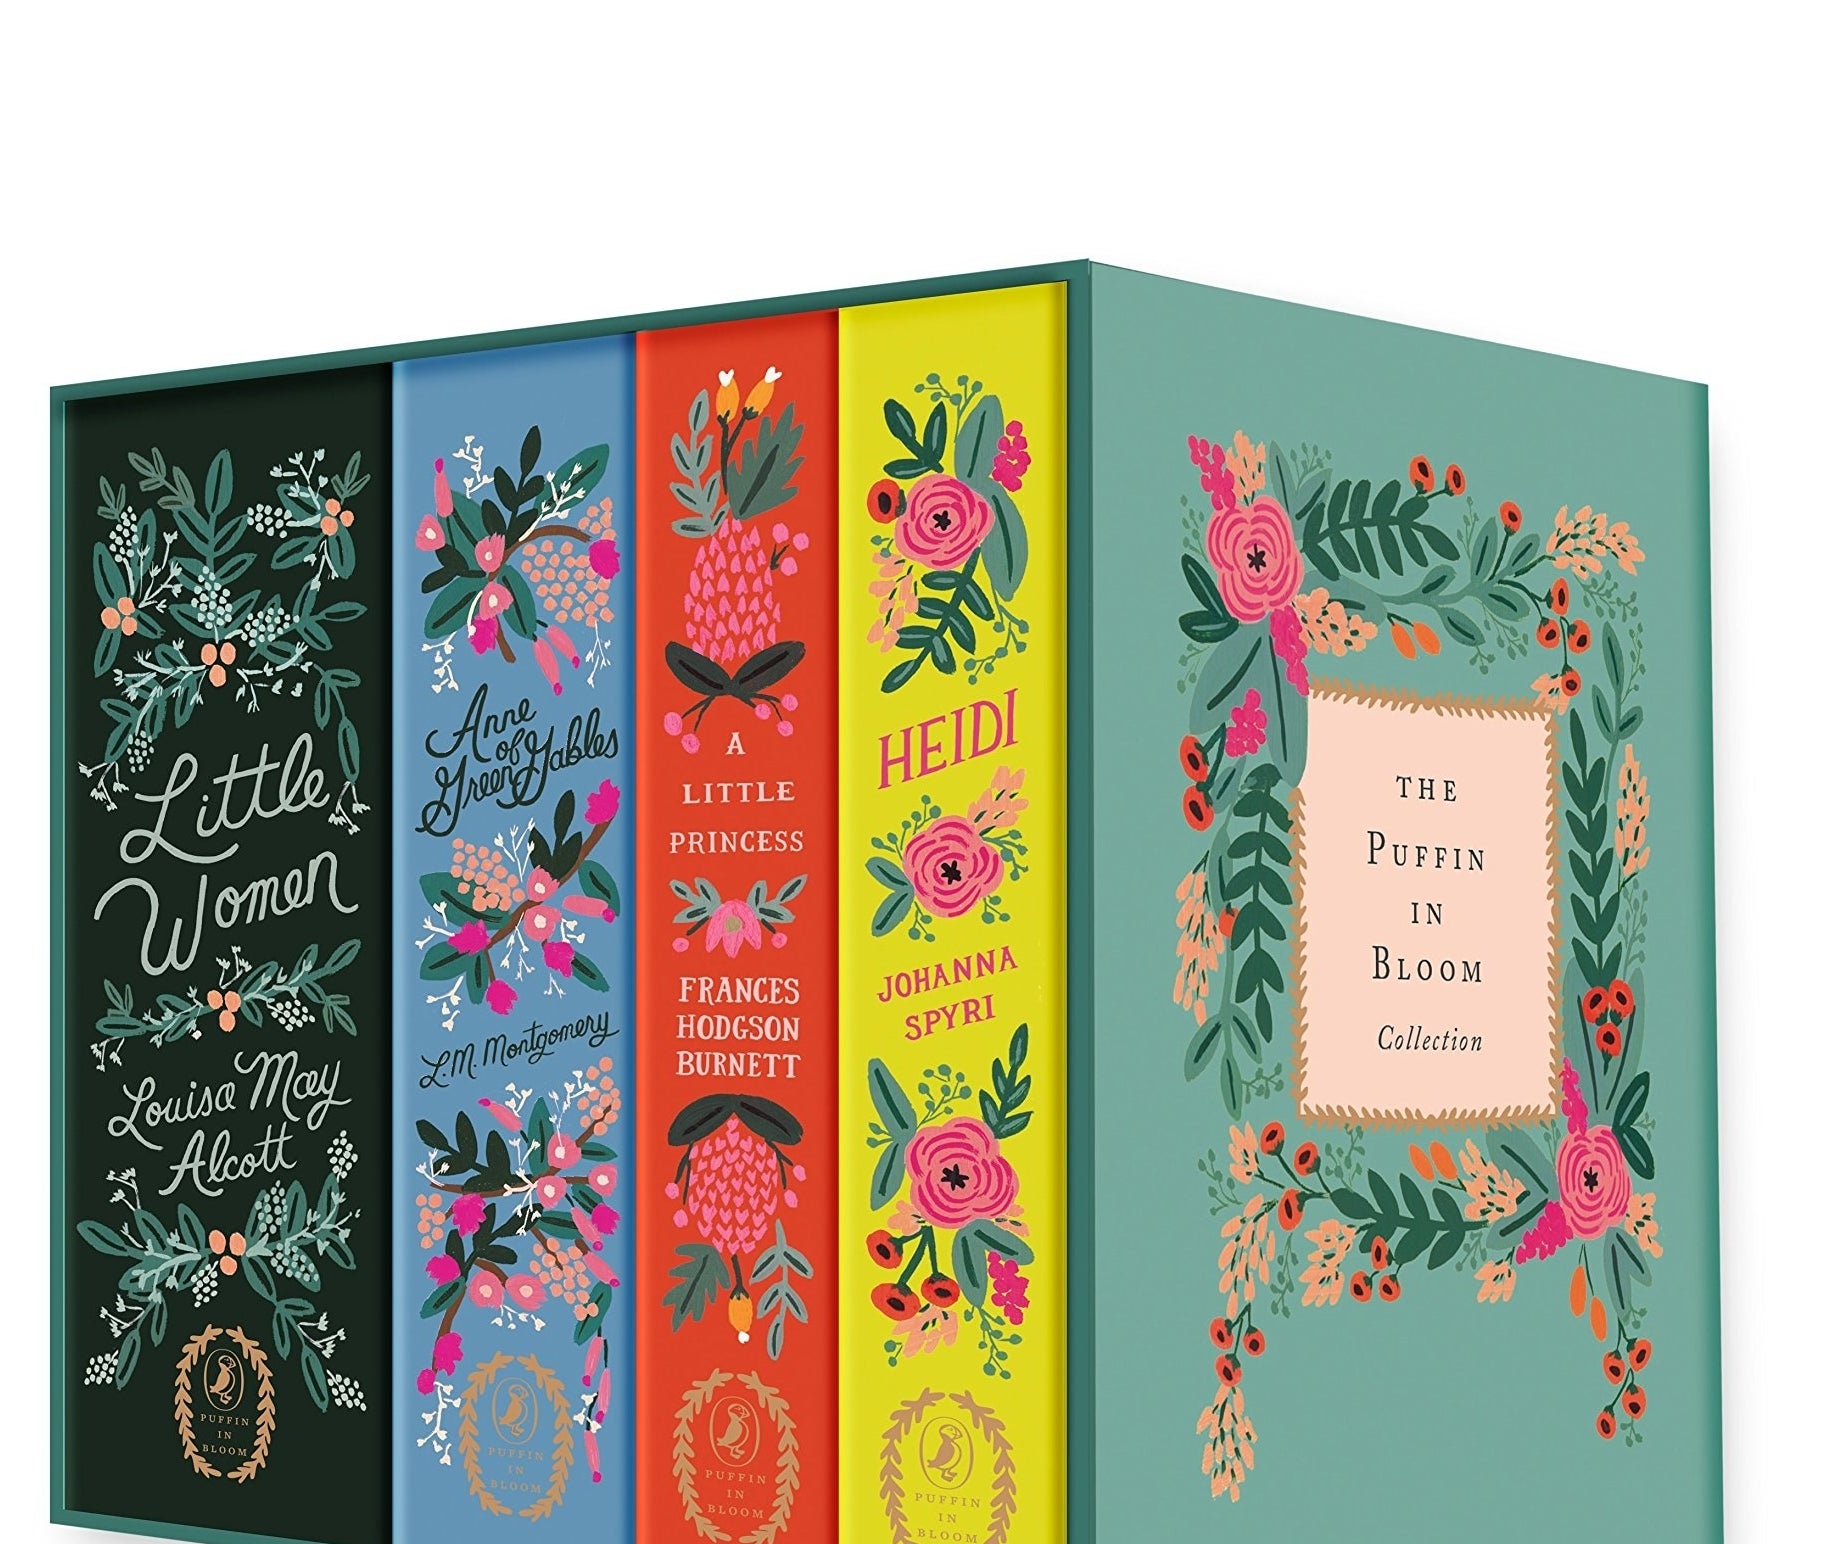 Bloom collection. Little women Hardcover book Puffin in Bloom. Puffin Hardcover Classic. Puffin Classics Deluxe collection.